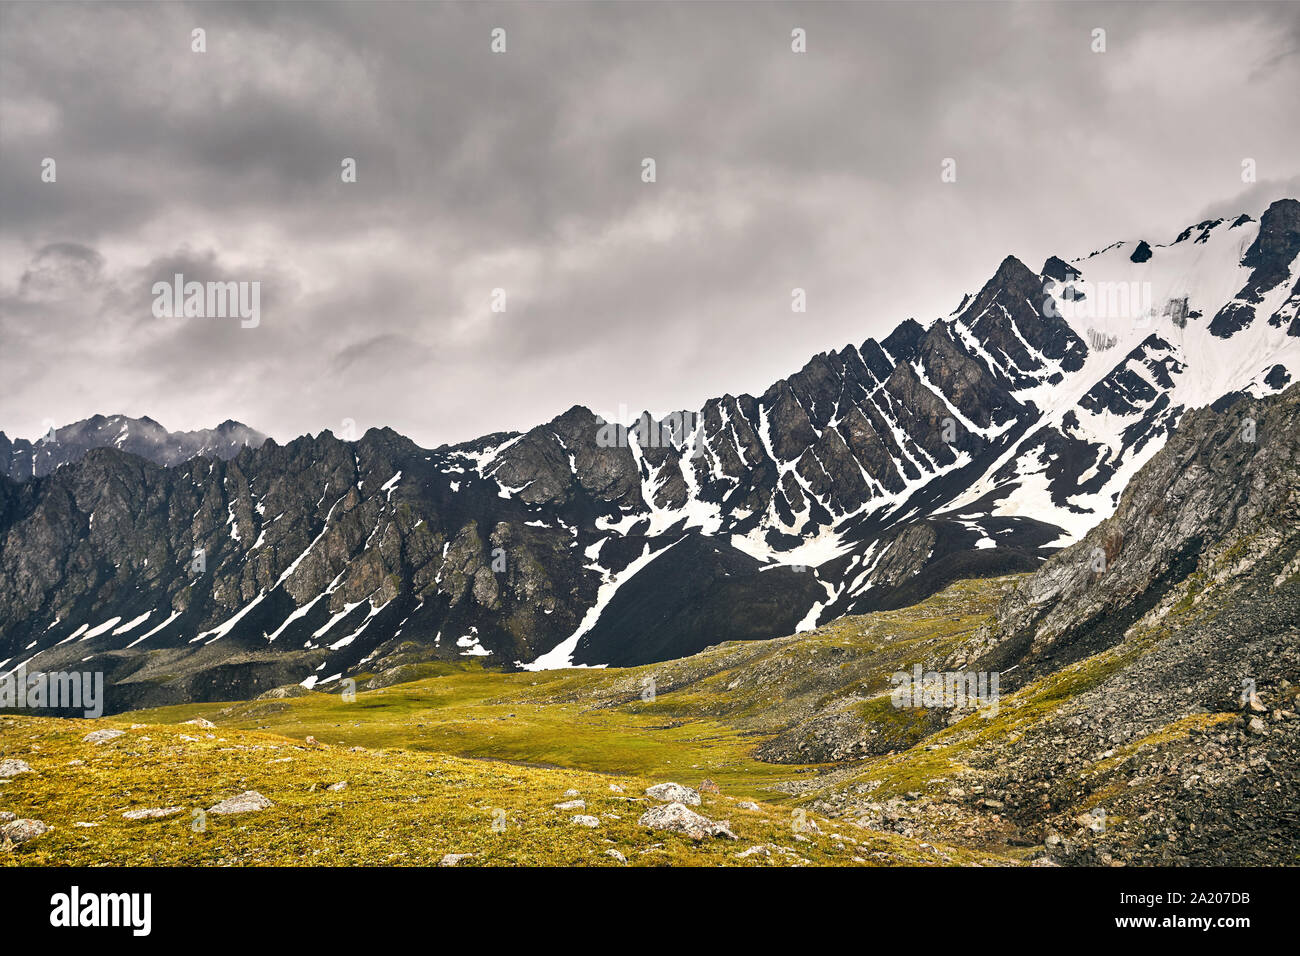 Dramatic scenery rocky mountains at overcast sky in Altyn Arashan George, Kyrgyzstan Stock Photo